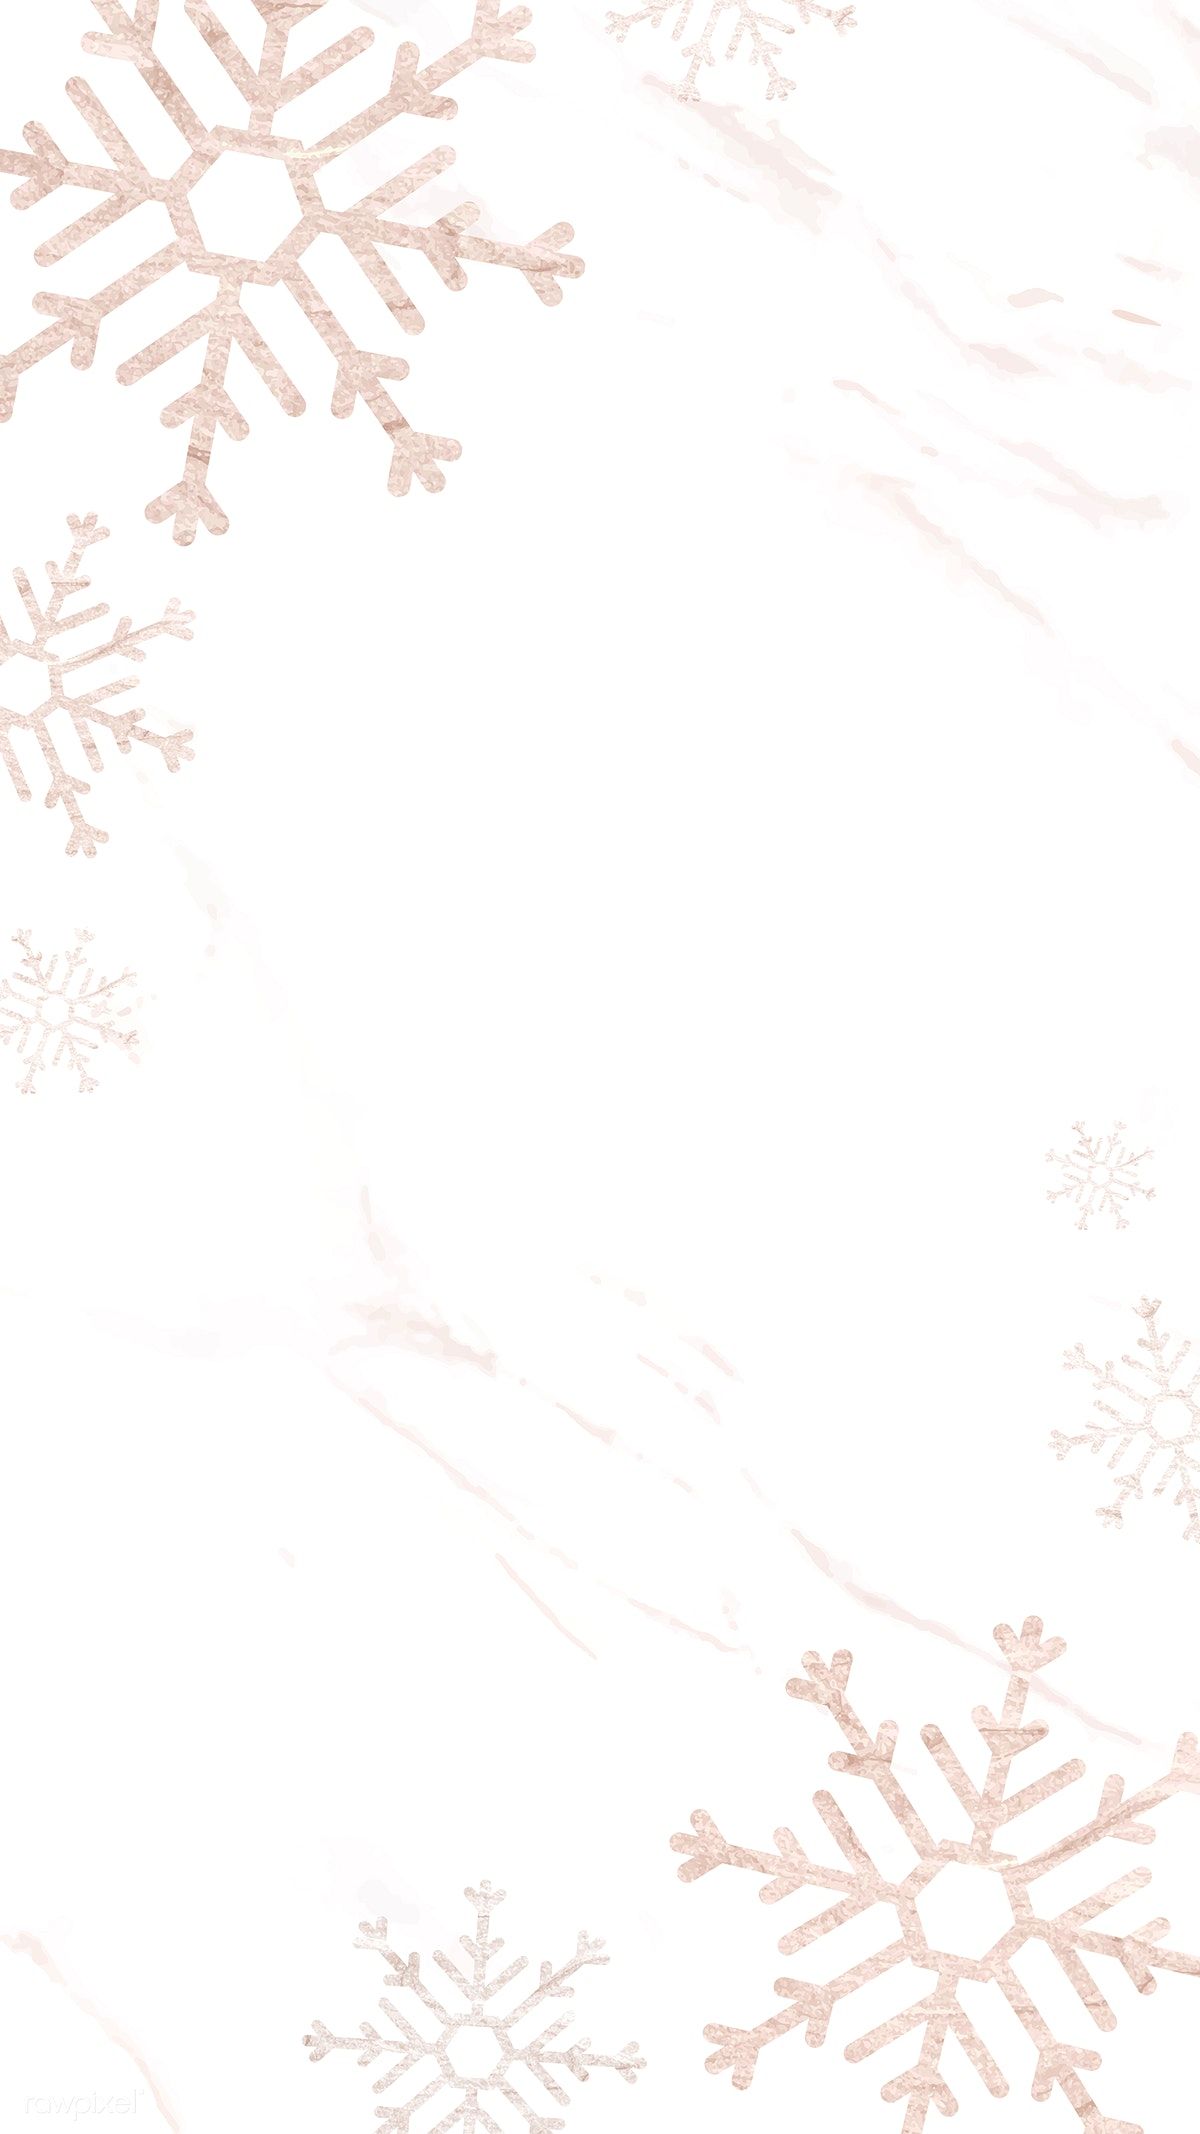 Download premium vector of Snowflakes patterned on white mobile phone wallpaper vector by Sasi about christmas winter snowflake background design white pink snow pink wallpaper and snowflakes phone wallpaper 1227568